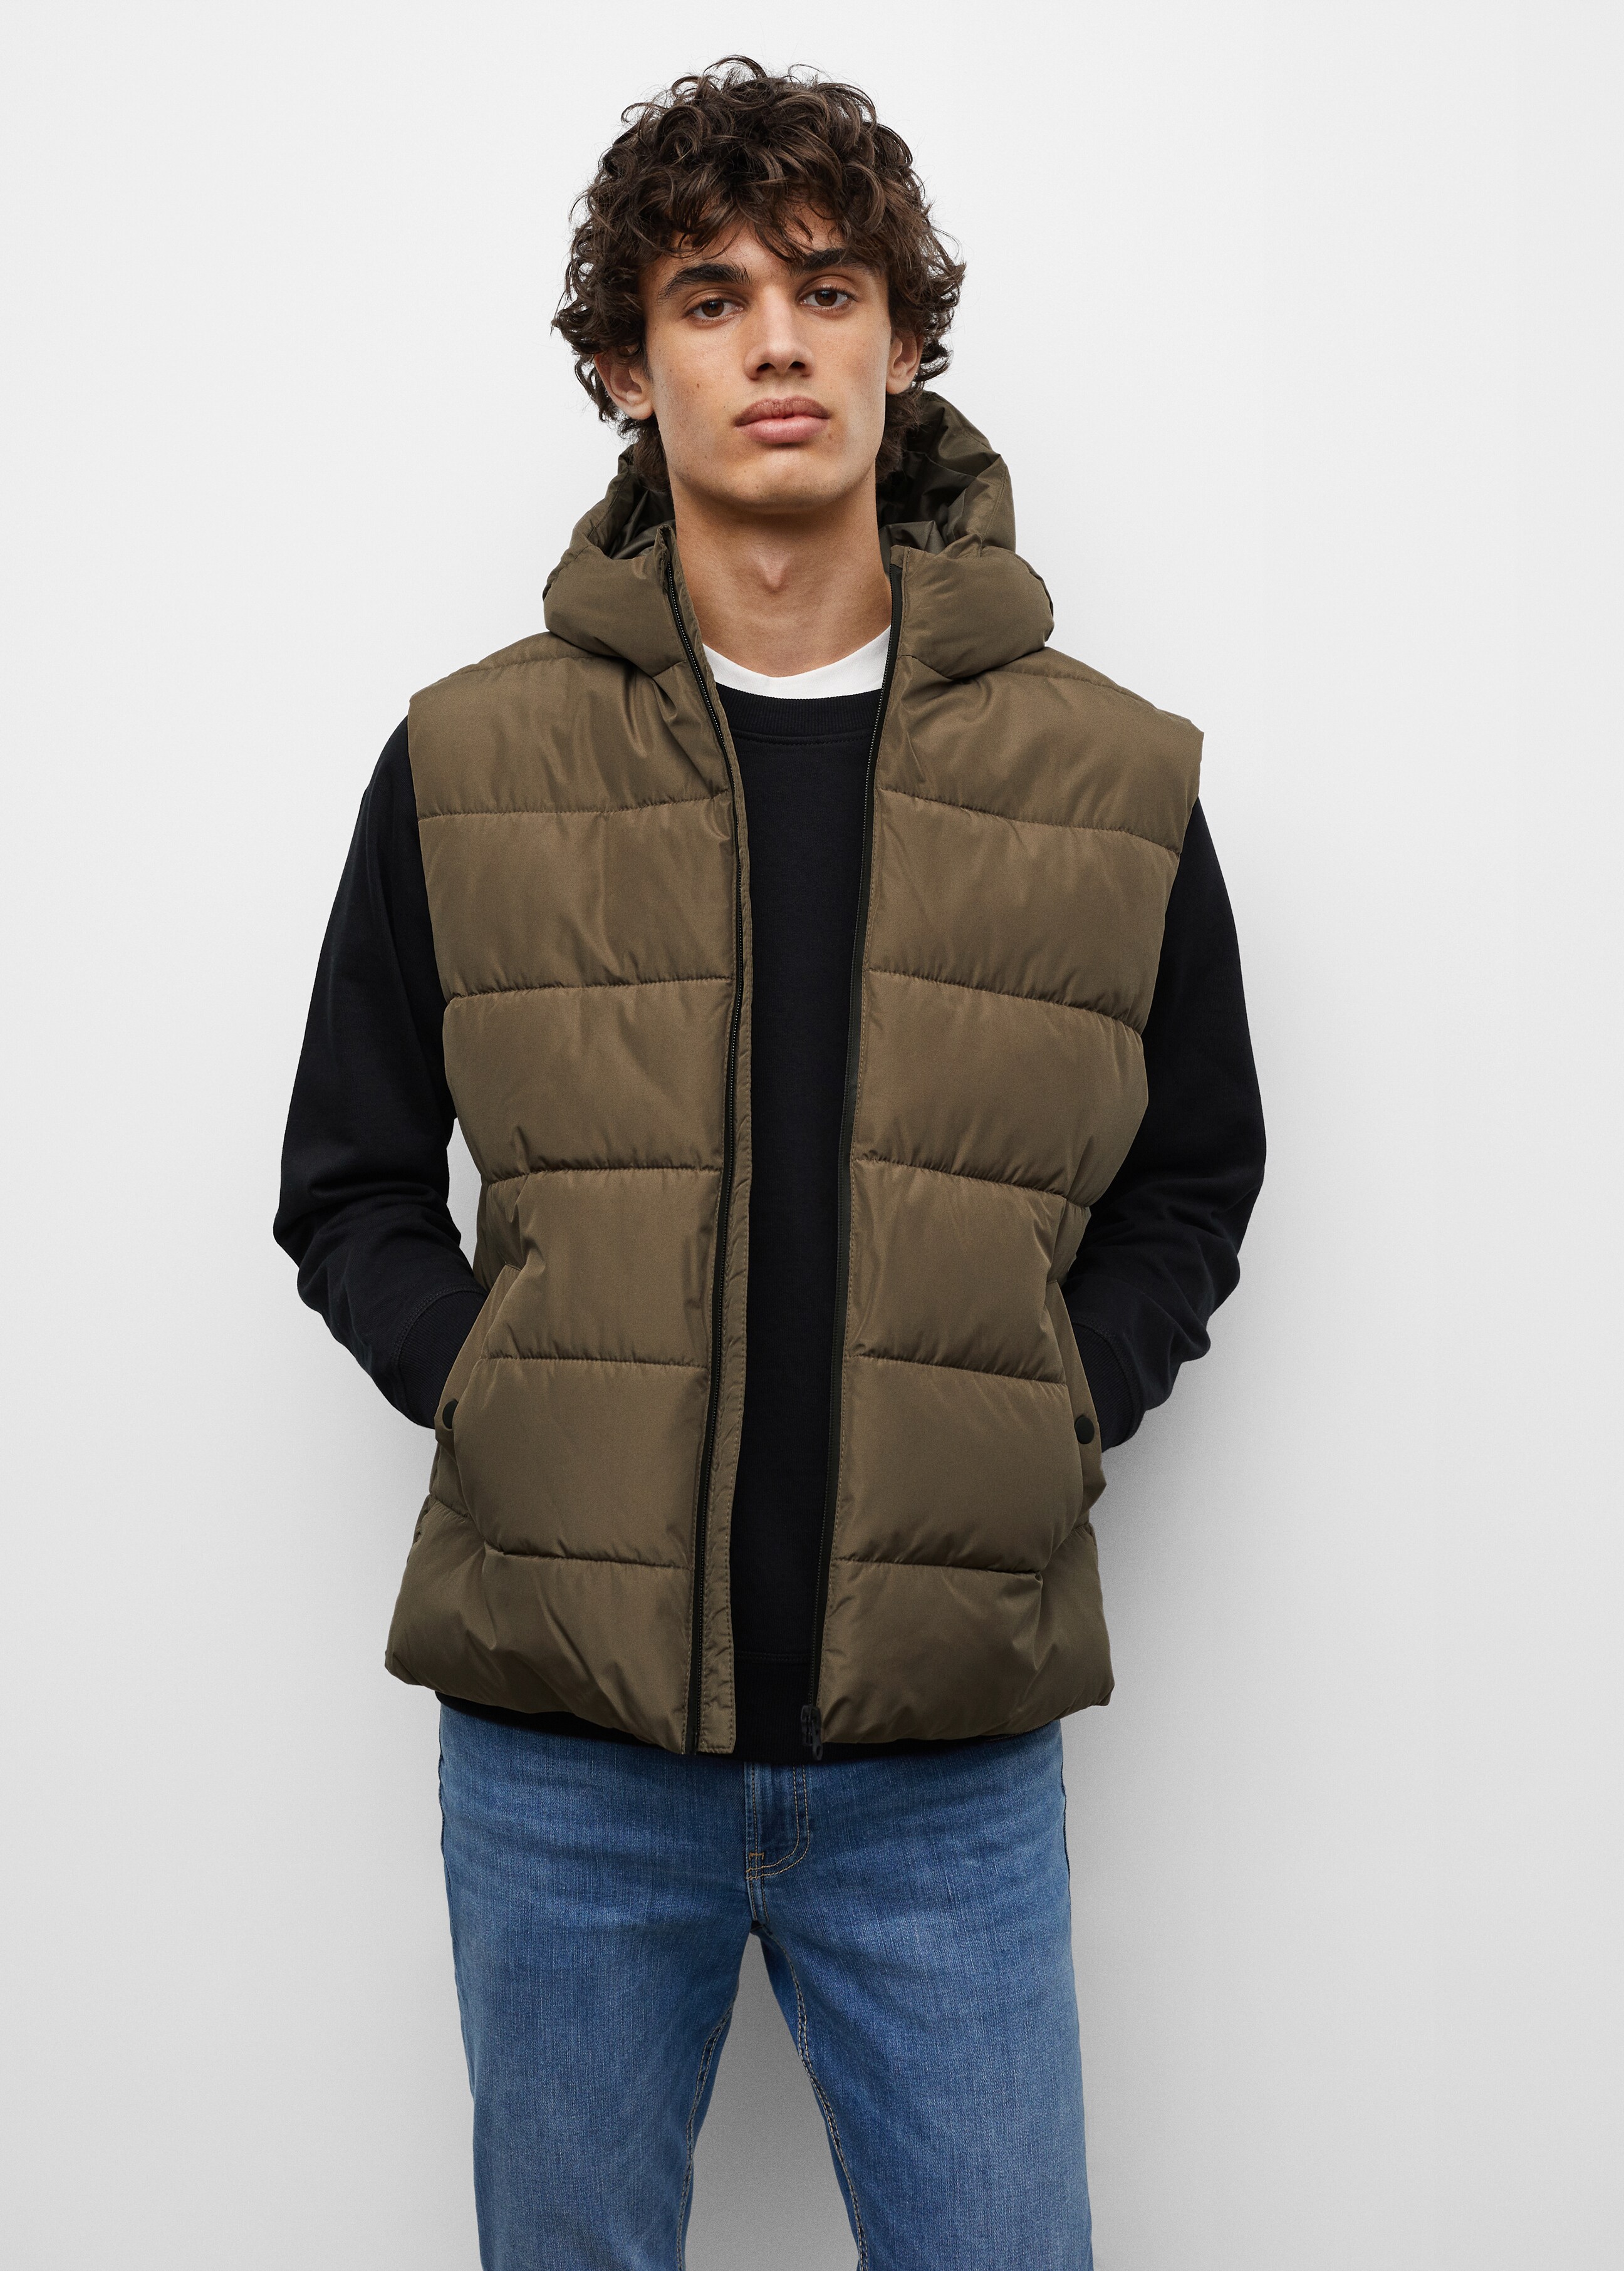 Down feather gilet with hood - Medium plane